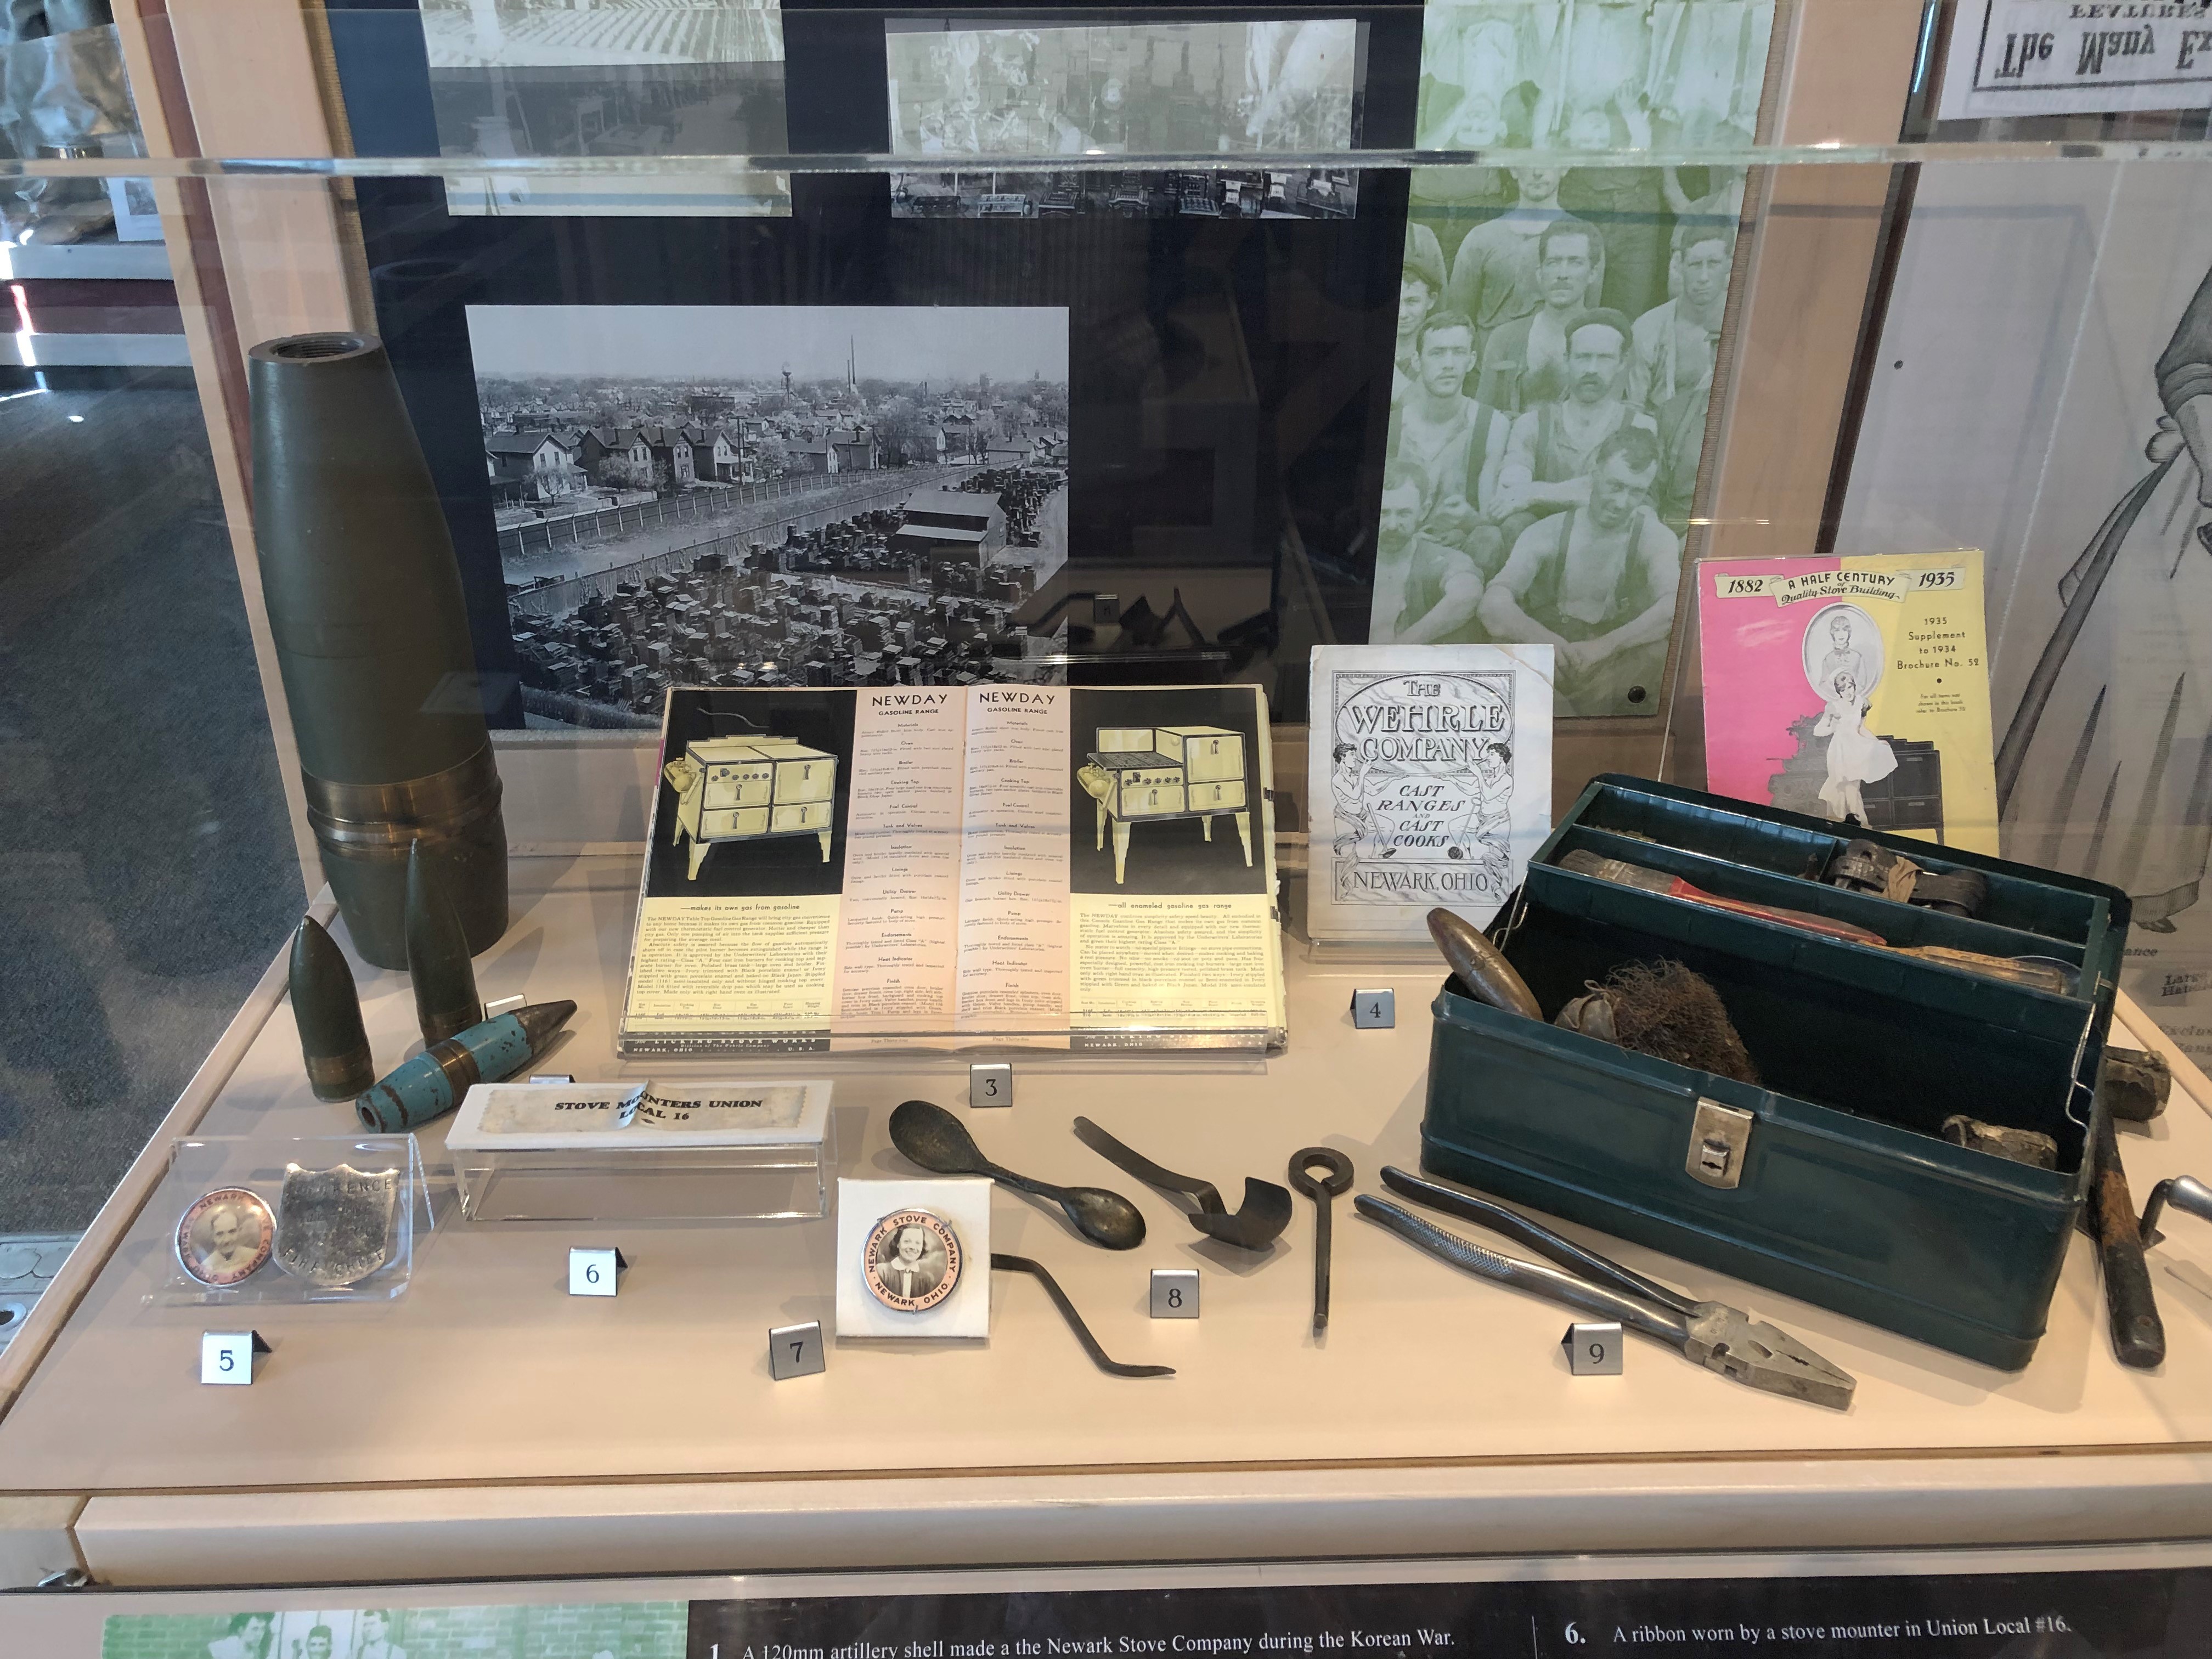 This case displays a variety of objects, including artillery shells made at the Newark Stove Company, employee ID badges, and tools used by workers.